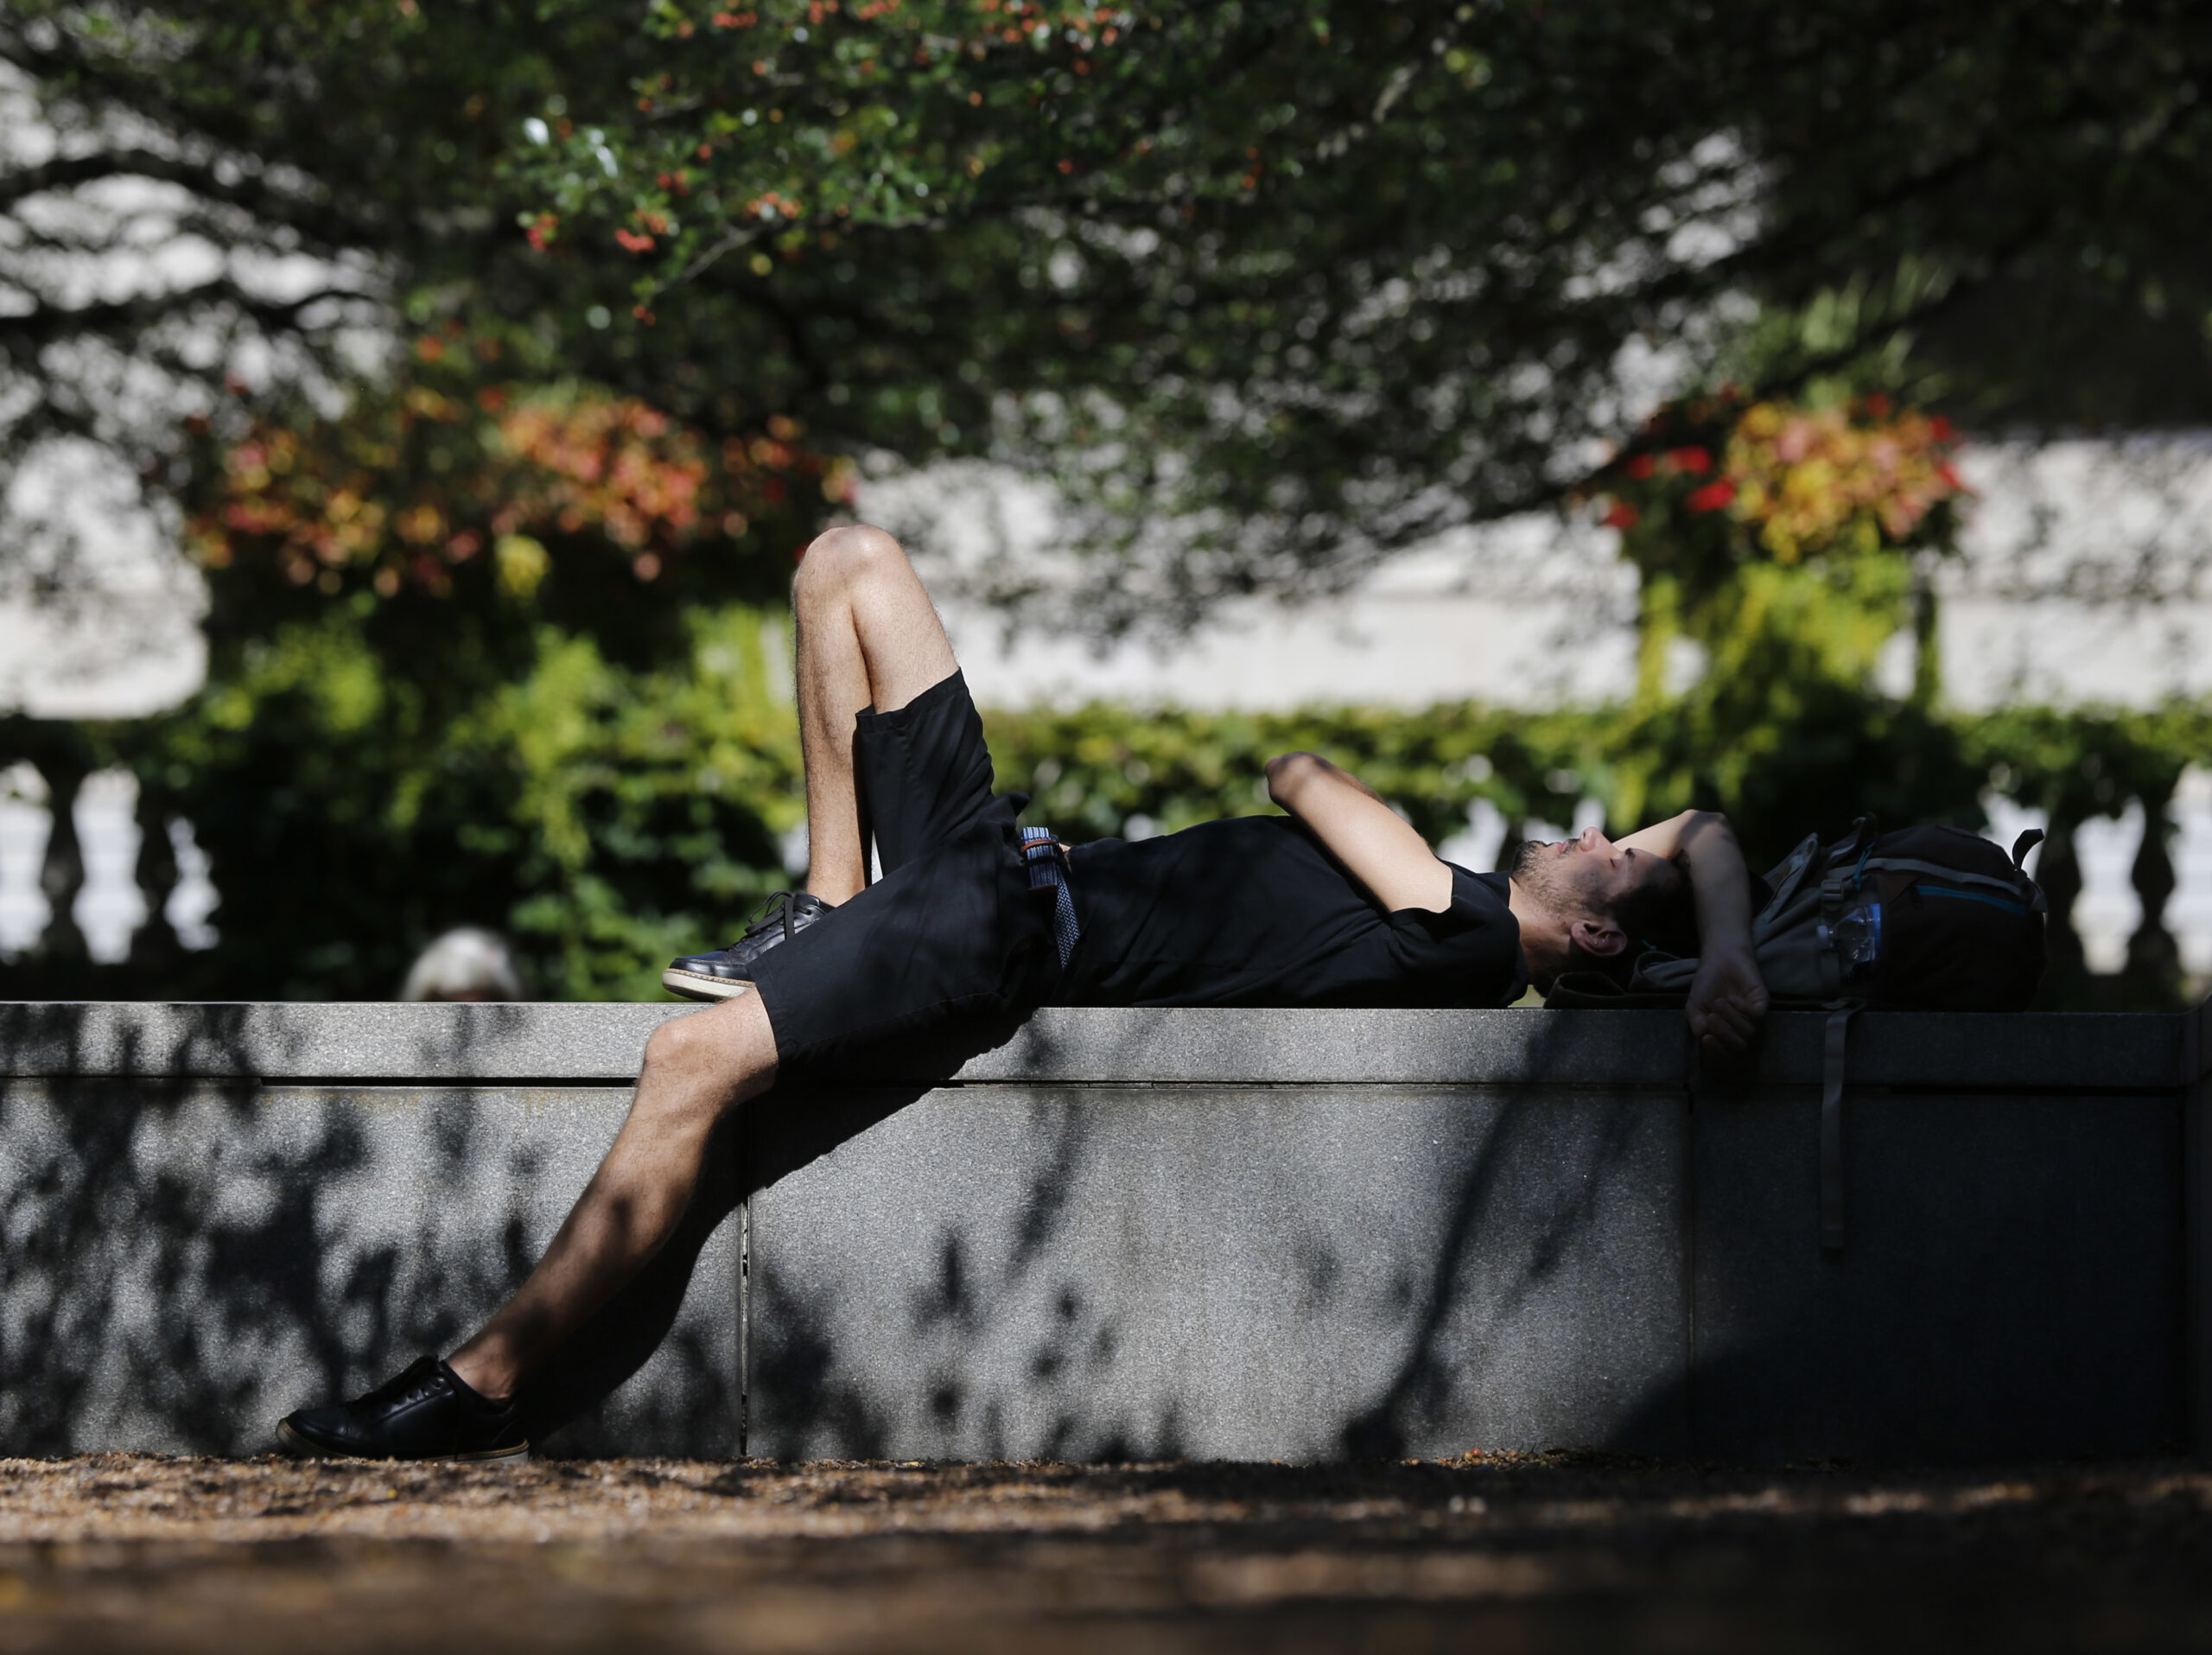 Kamil Szydlo naps in a garden at the Art Institute of Chicago